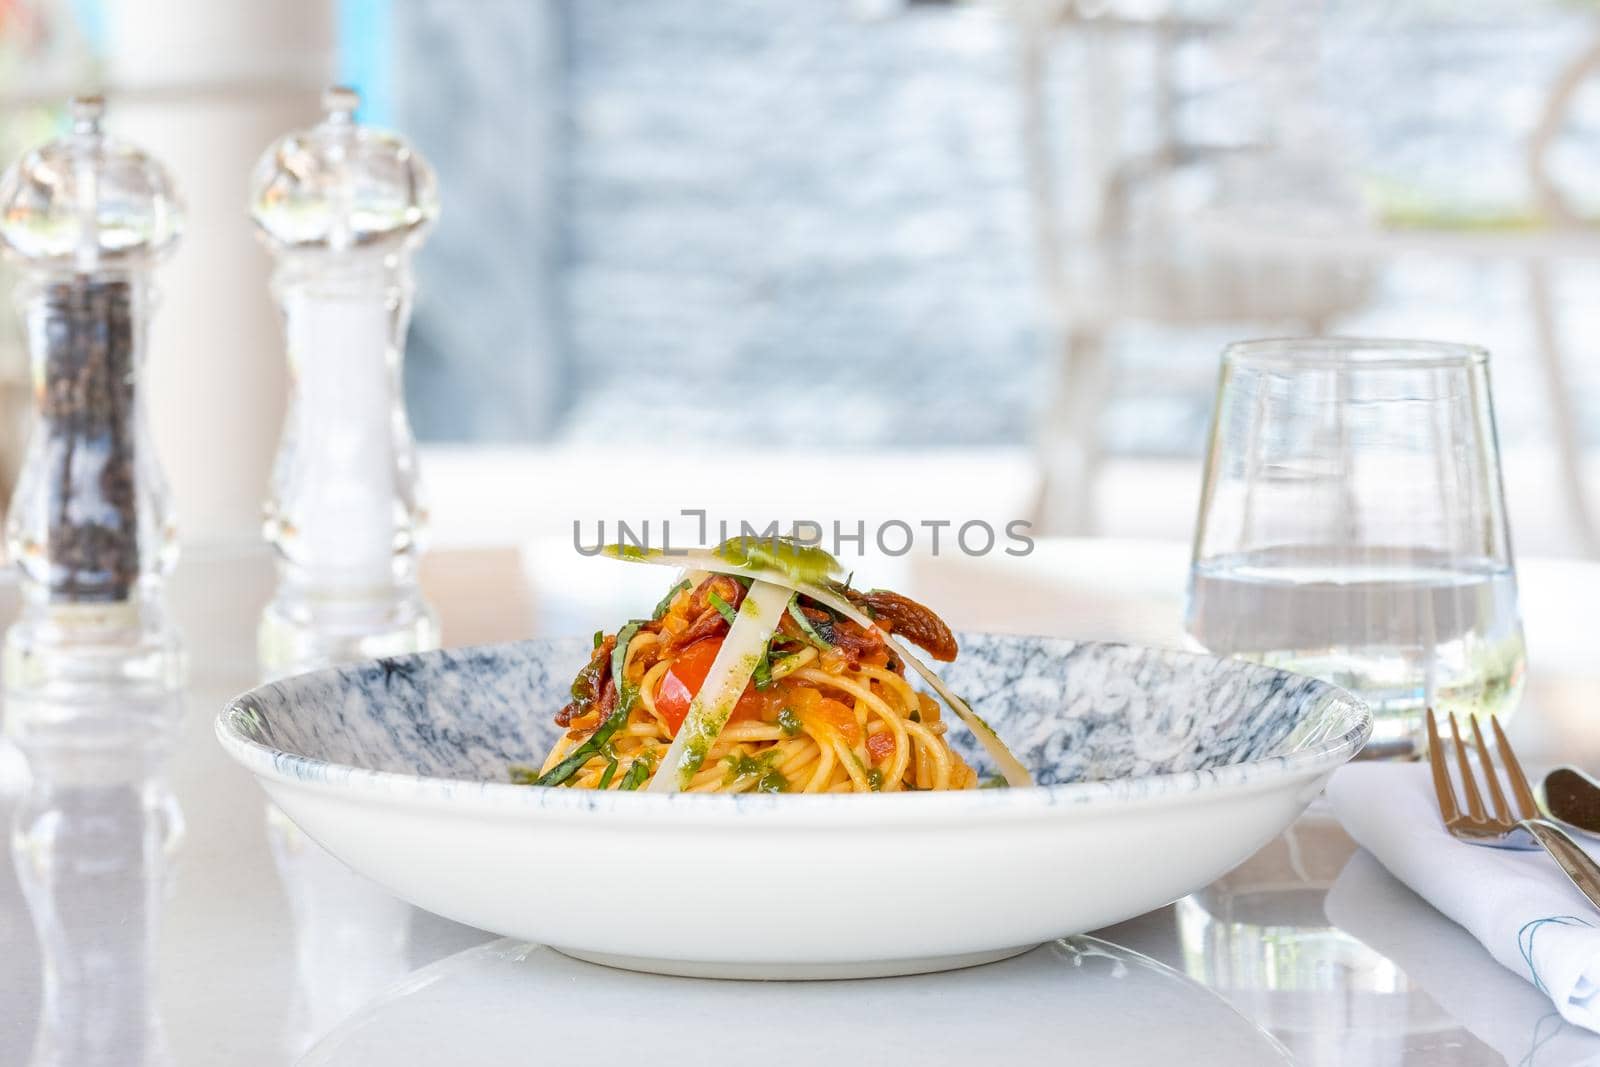 Spaghetti with a spicy sauce, chili pepper and grated parmesan cheese by Sonat